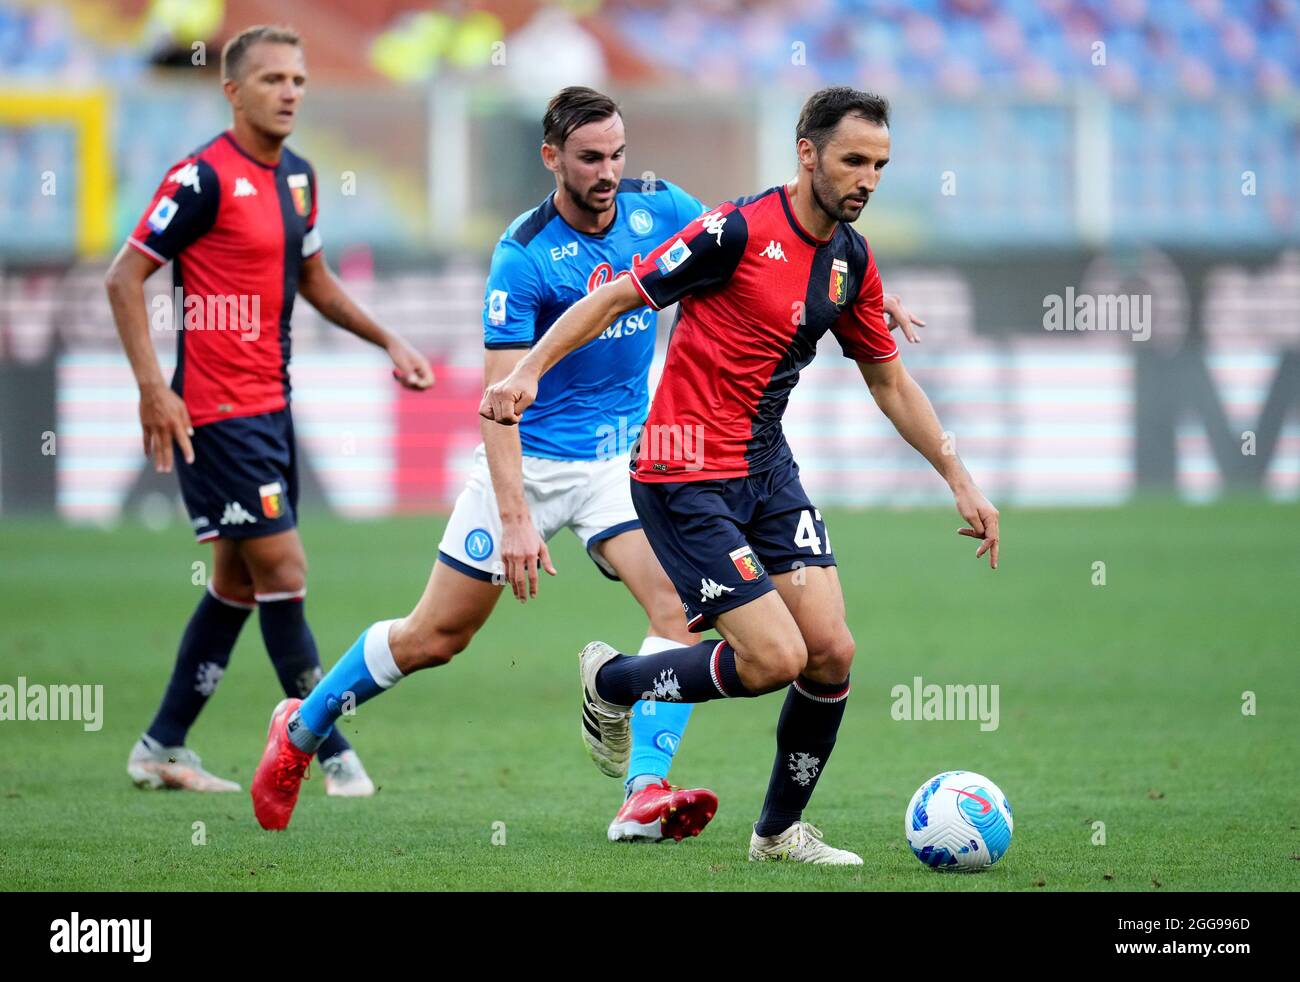 GENOA, ITALY - AUGUST 29: Milan Badelj of Genoa CFC competes for